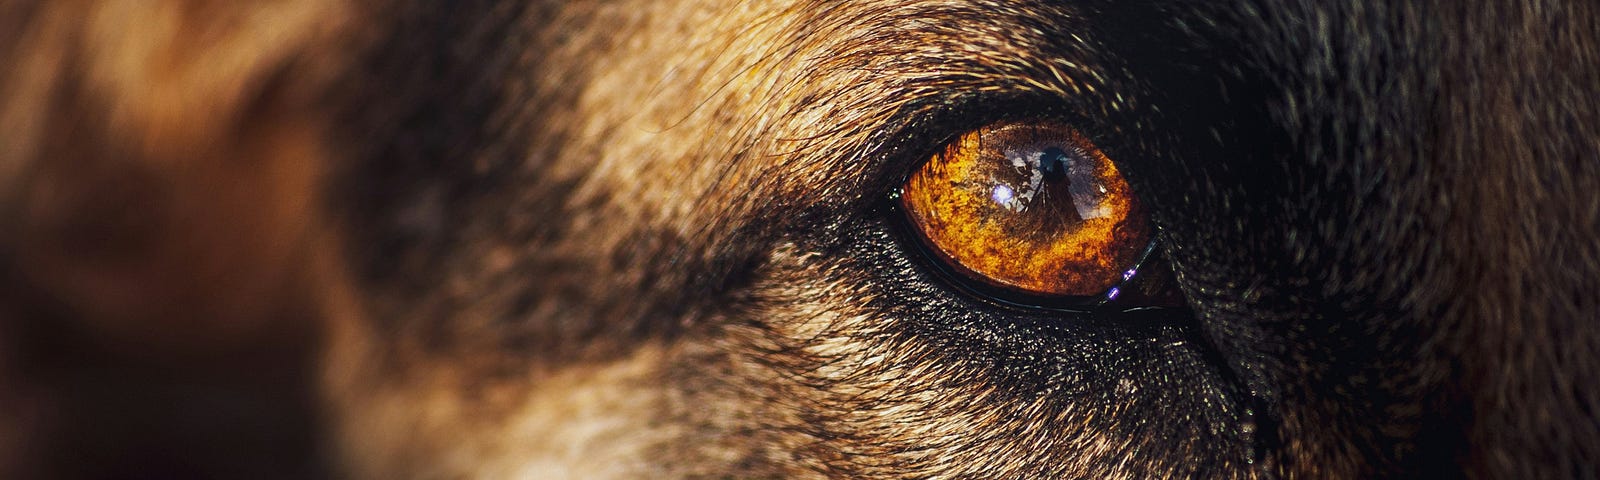 Close-up of a dog’s eye, brown and black short-coated dog.